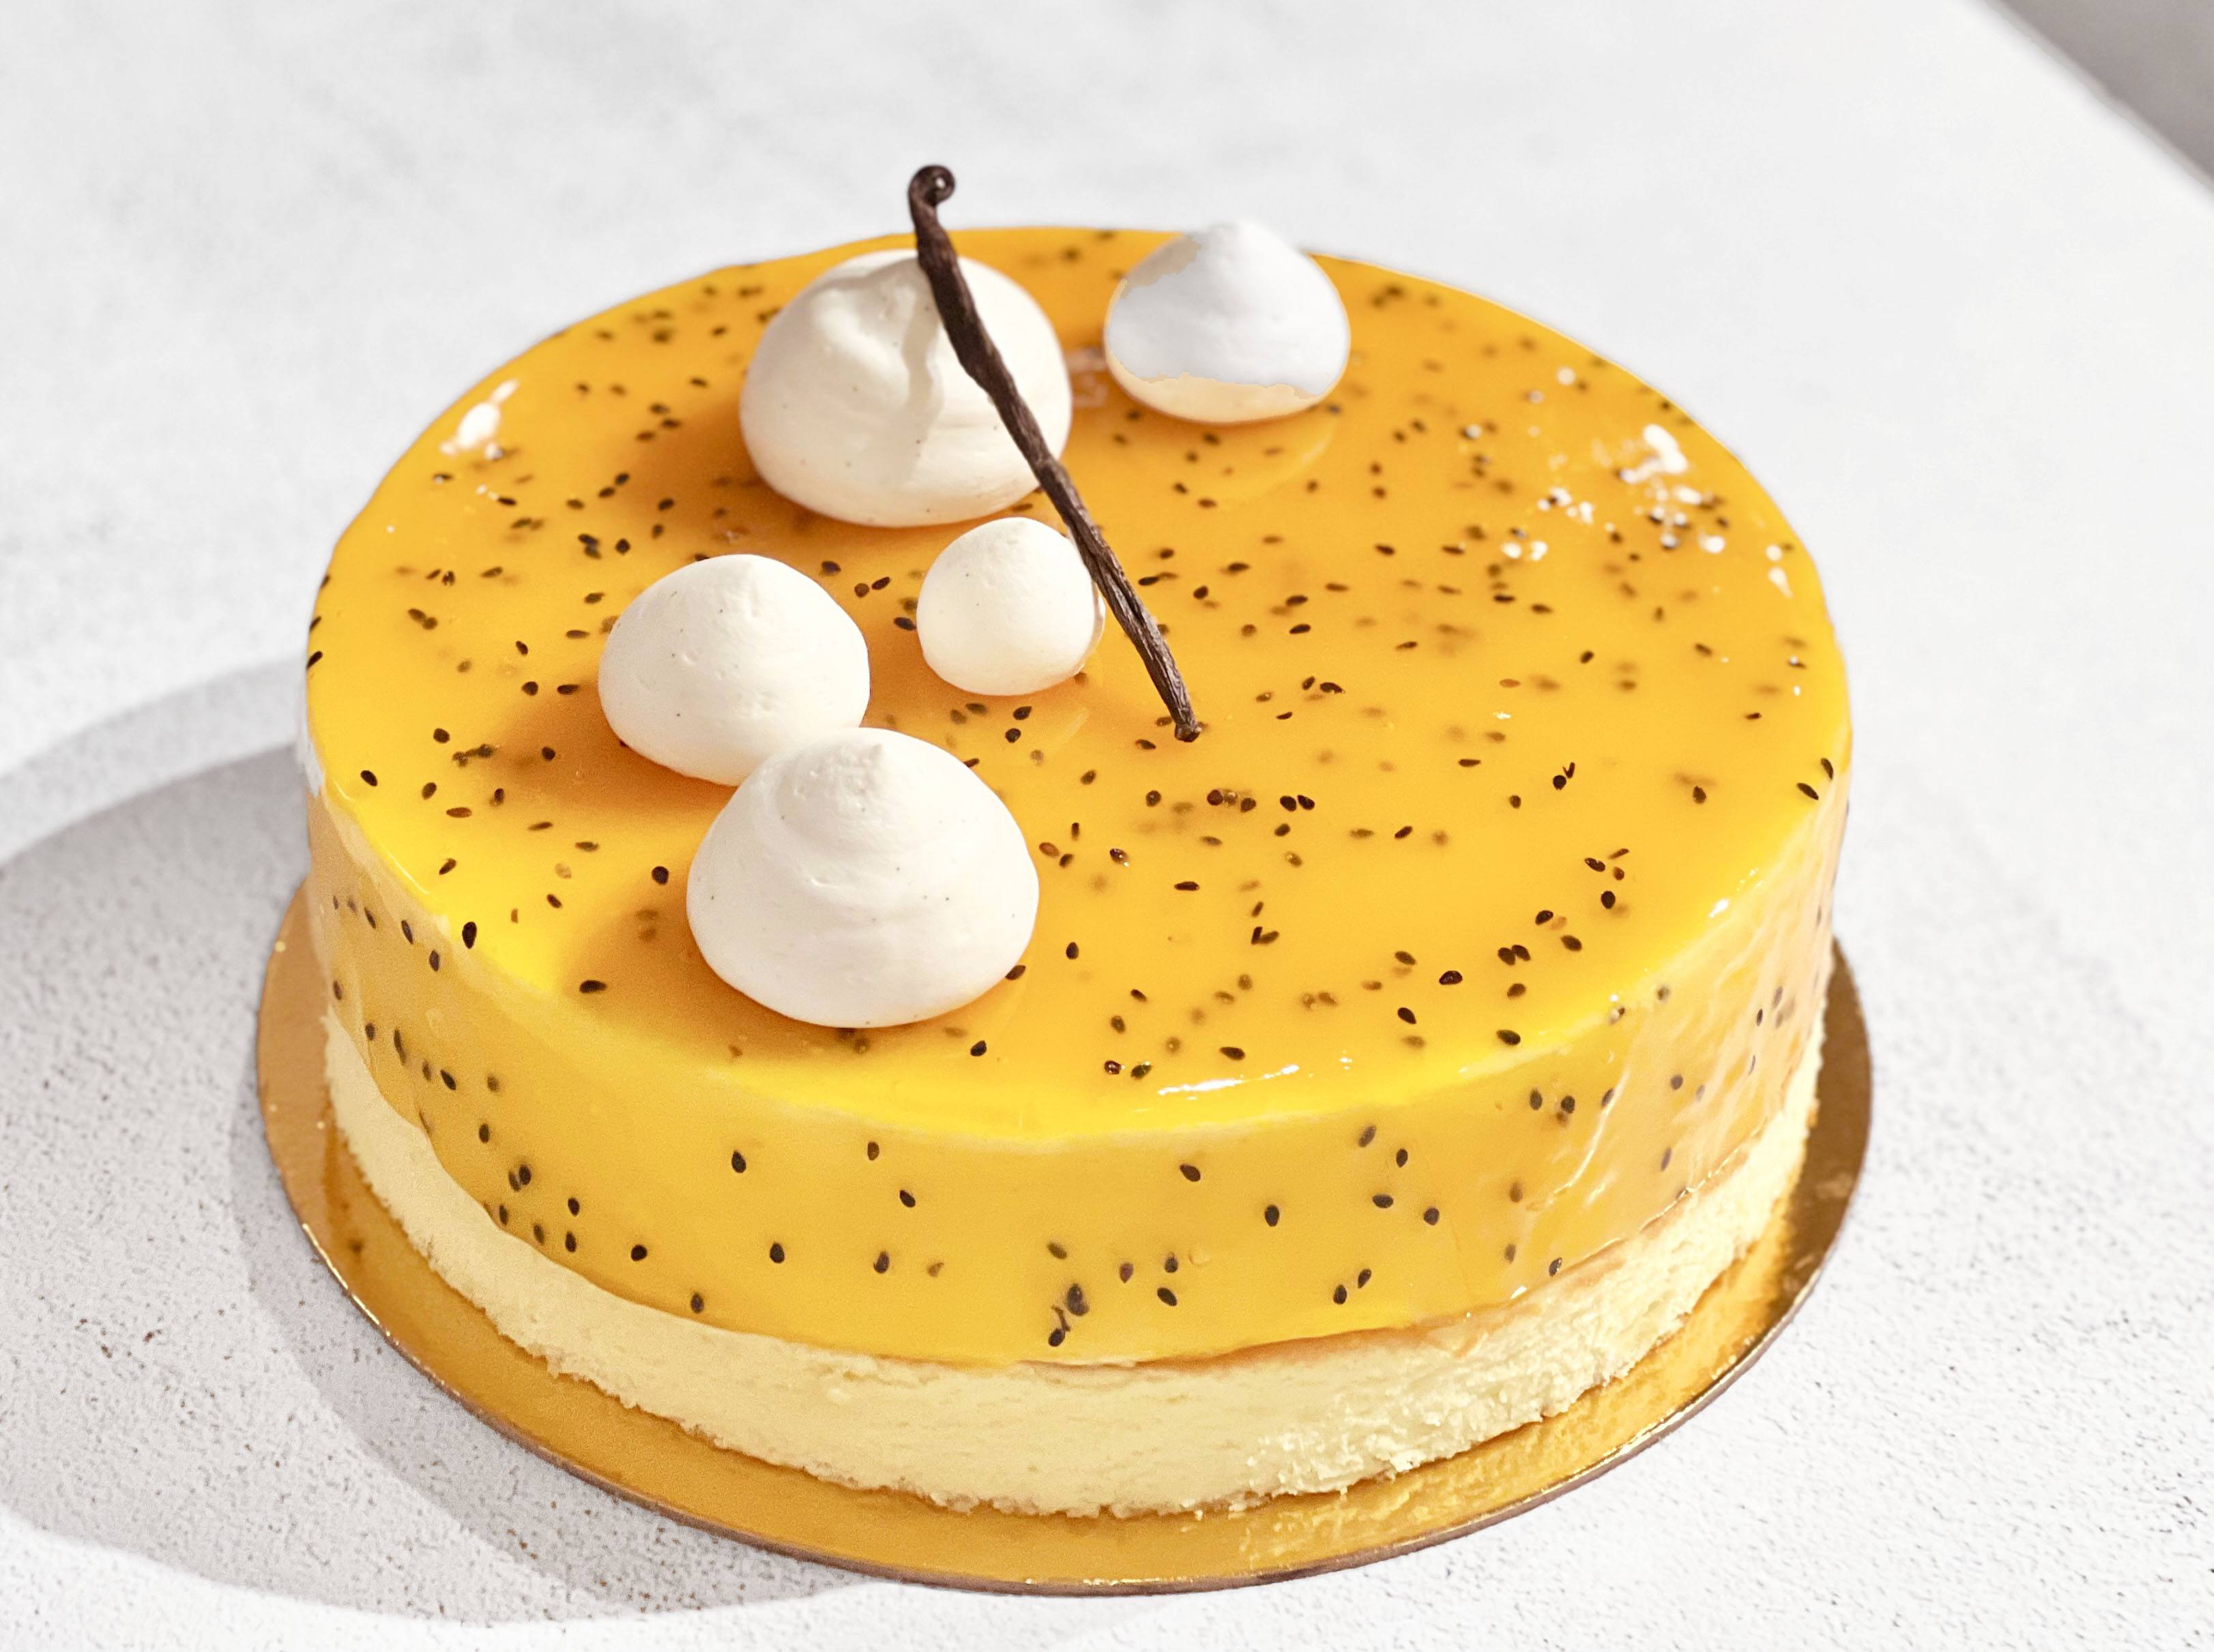 Passion fruit cake Recipe by Kereto's Kitchen - Cookpad